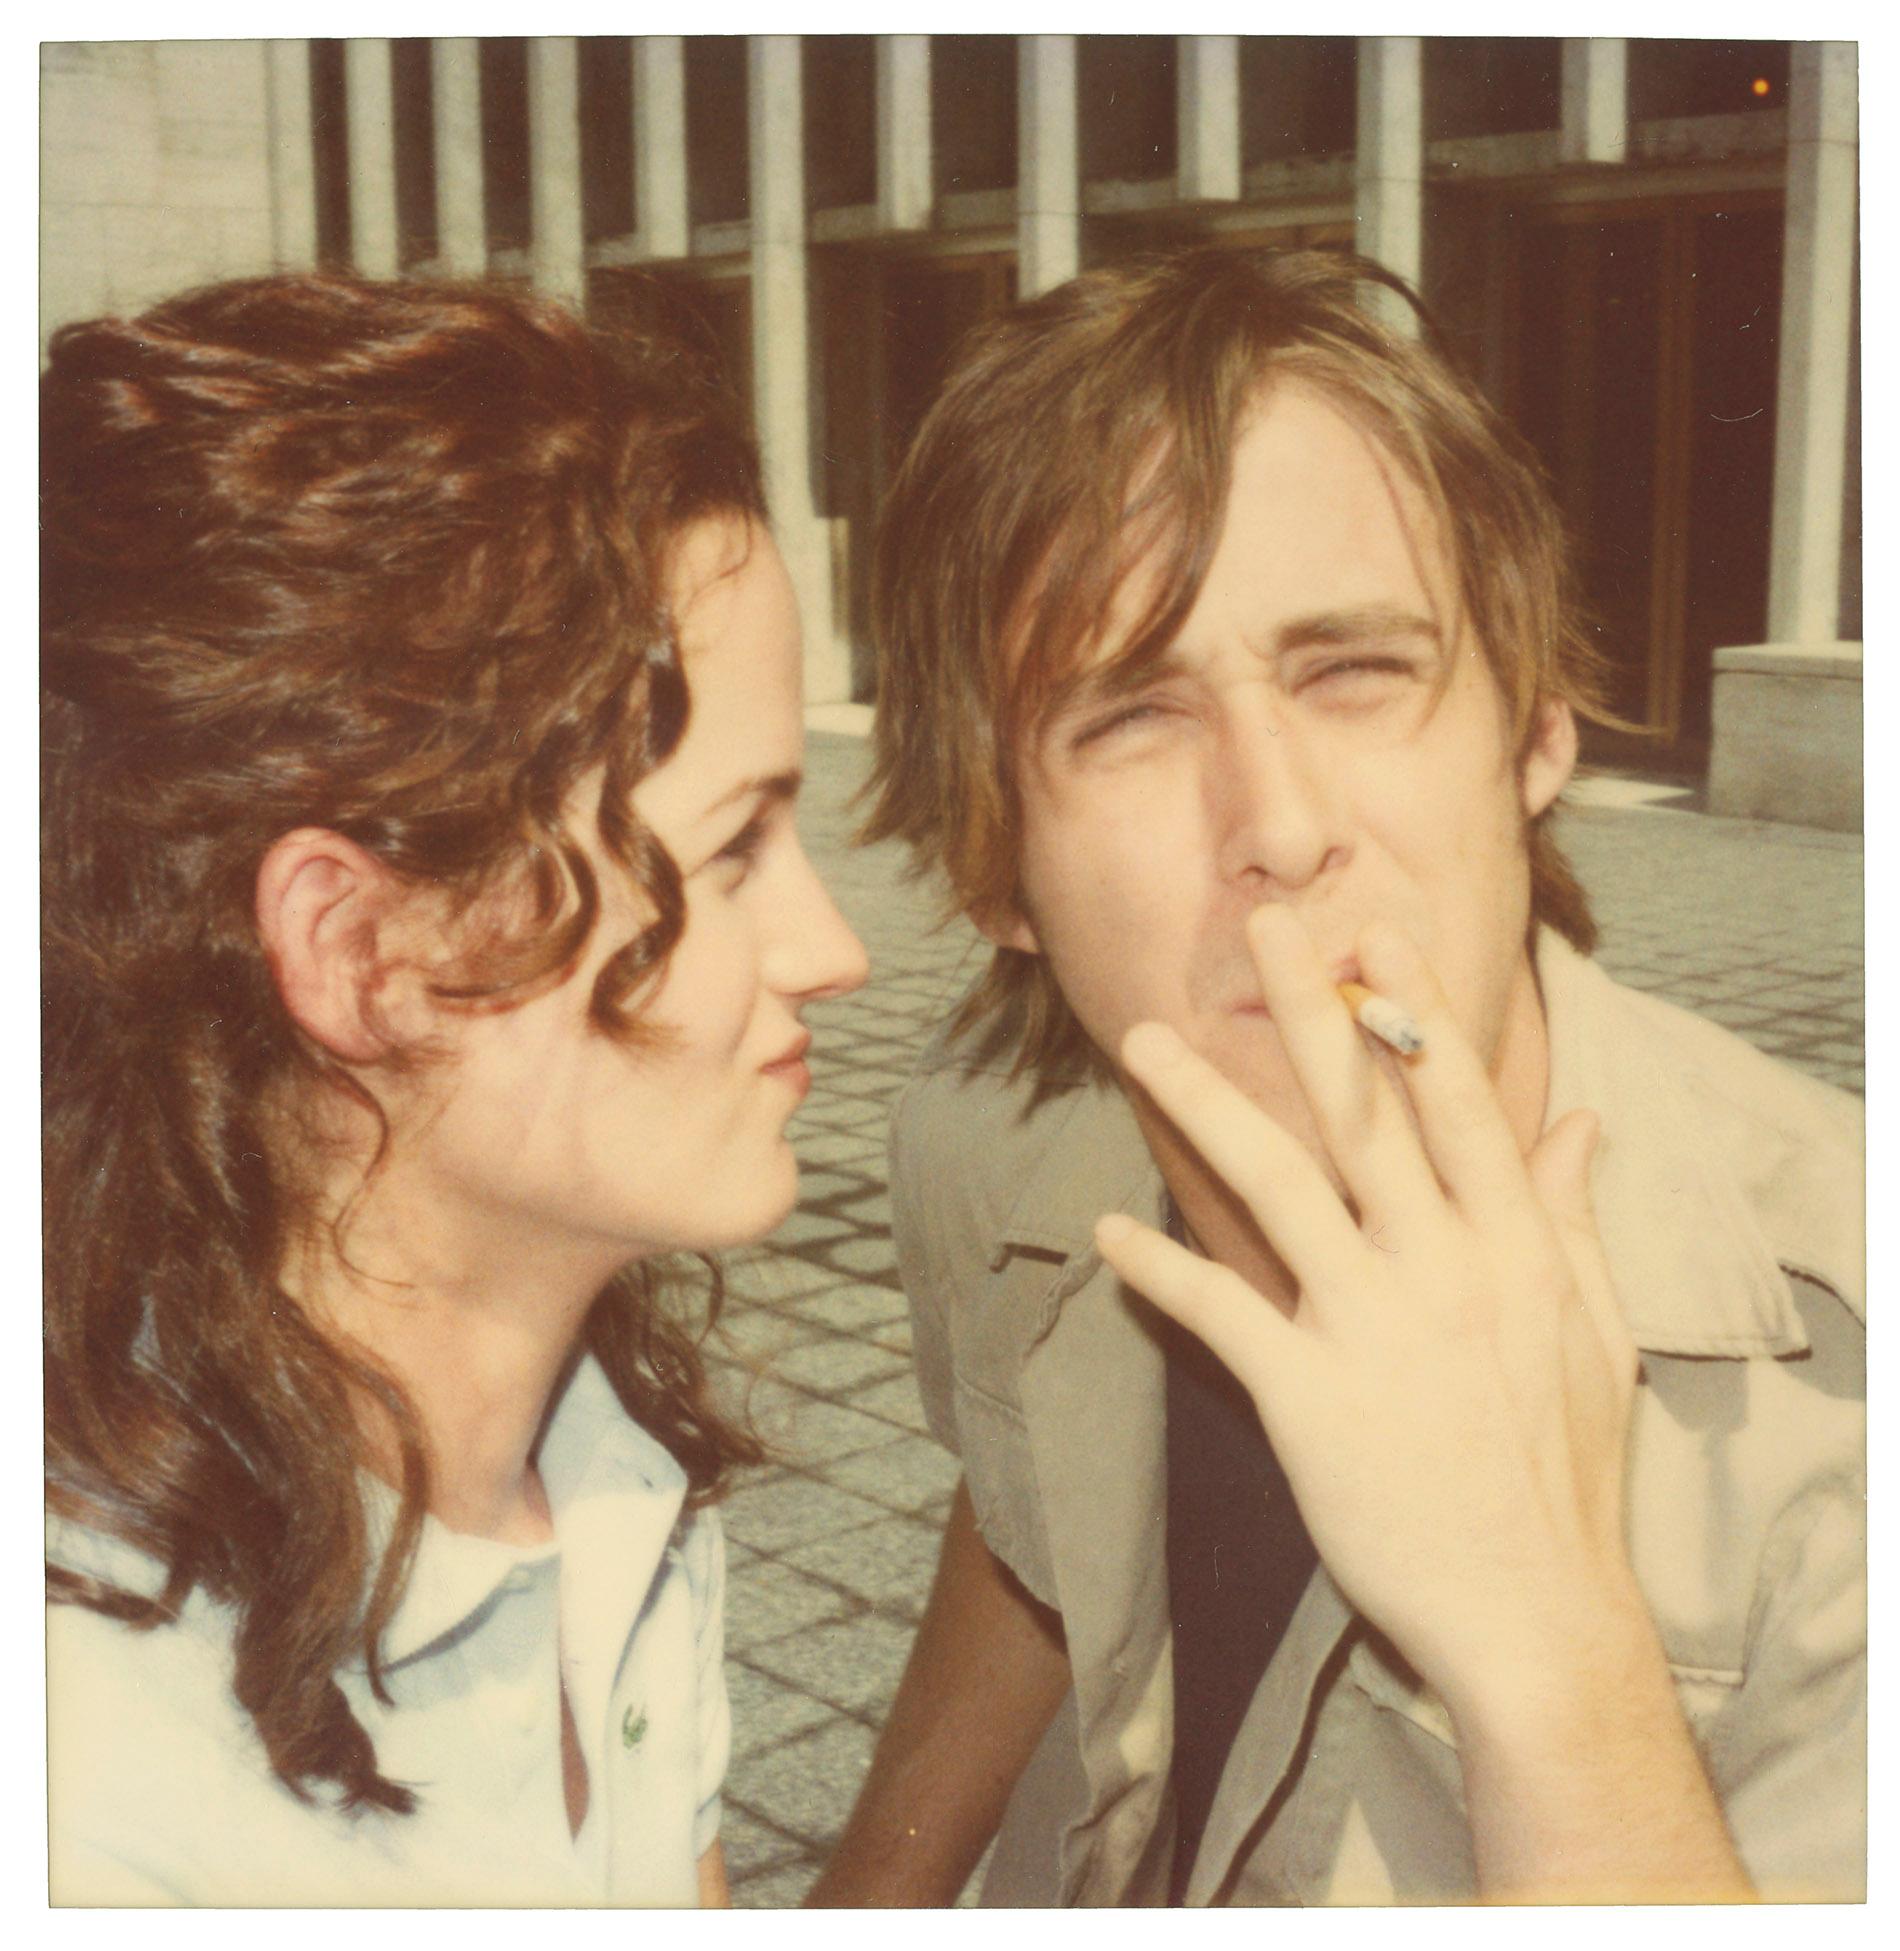 Athena and Henry (Stay) - with Ryan Gosling - 21st Century, Polaroid